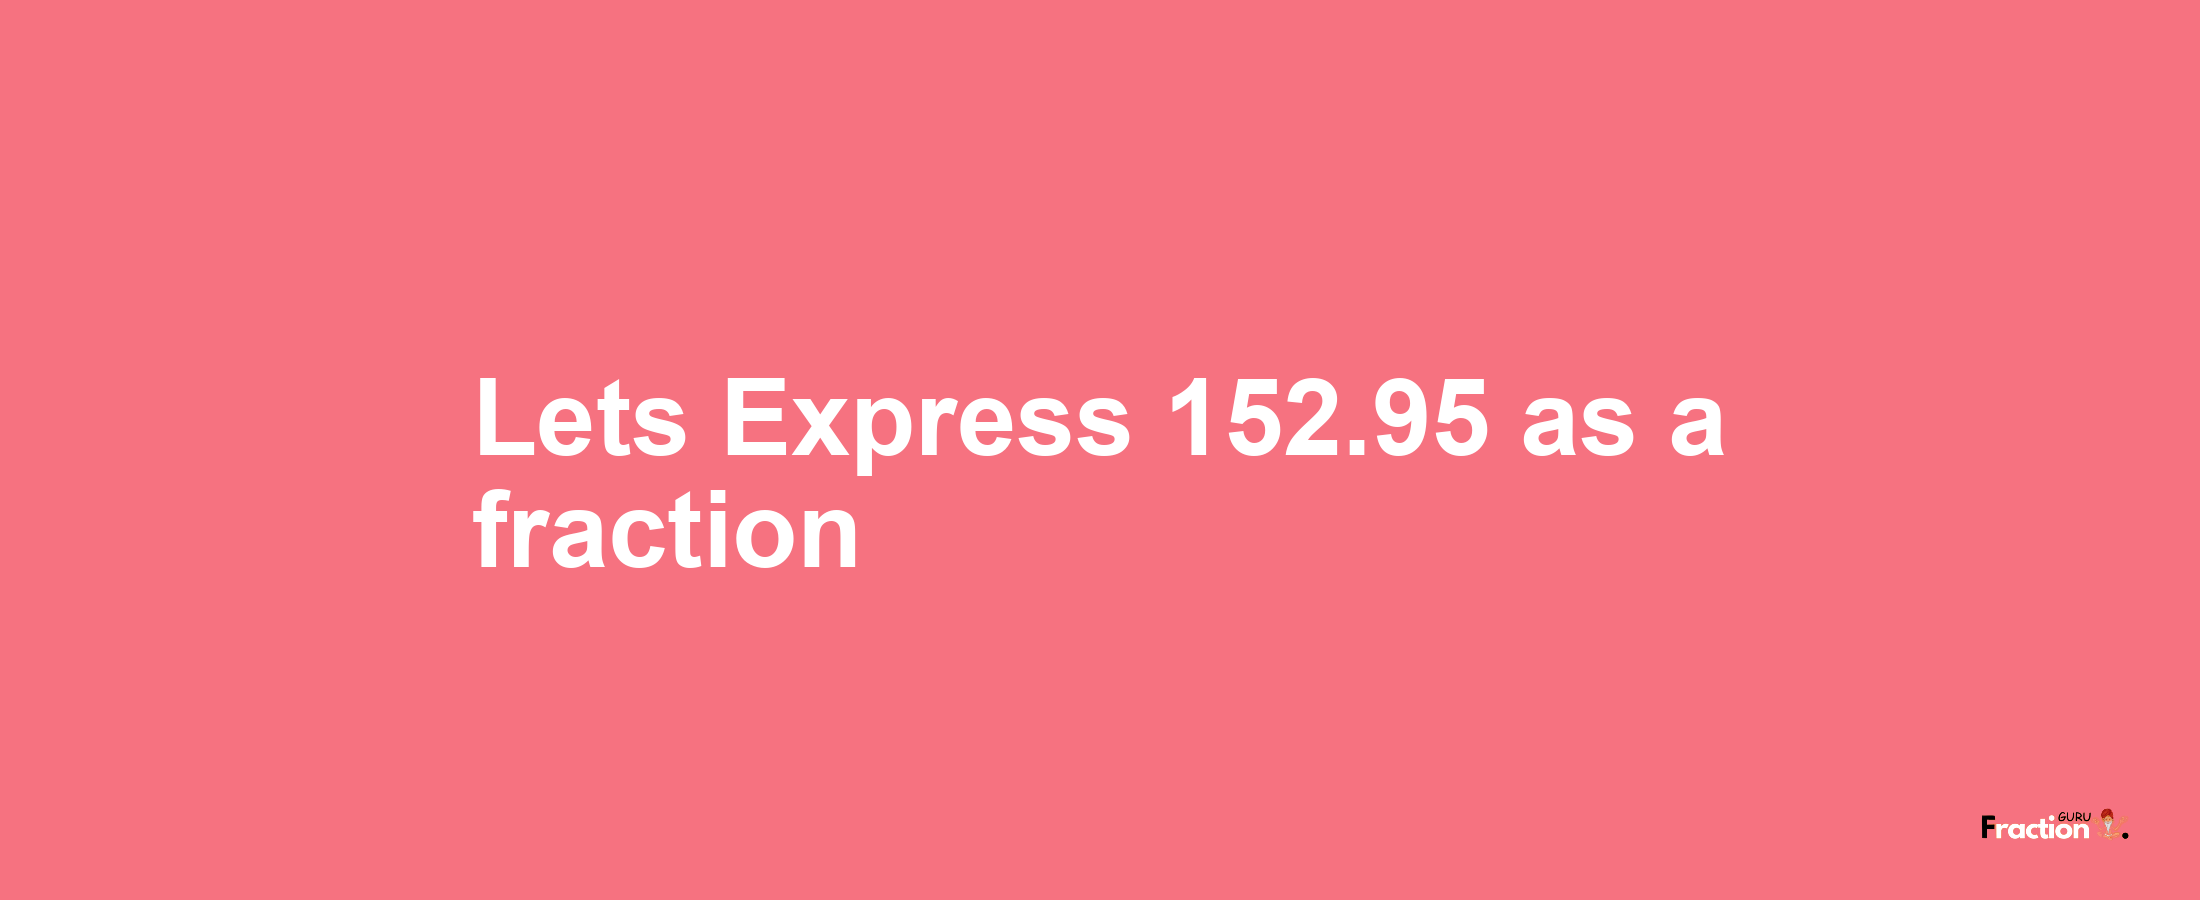 Lets Express 152.95 as afraction